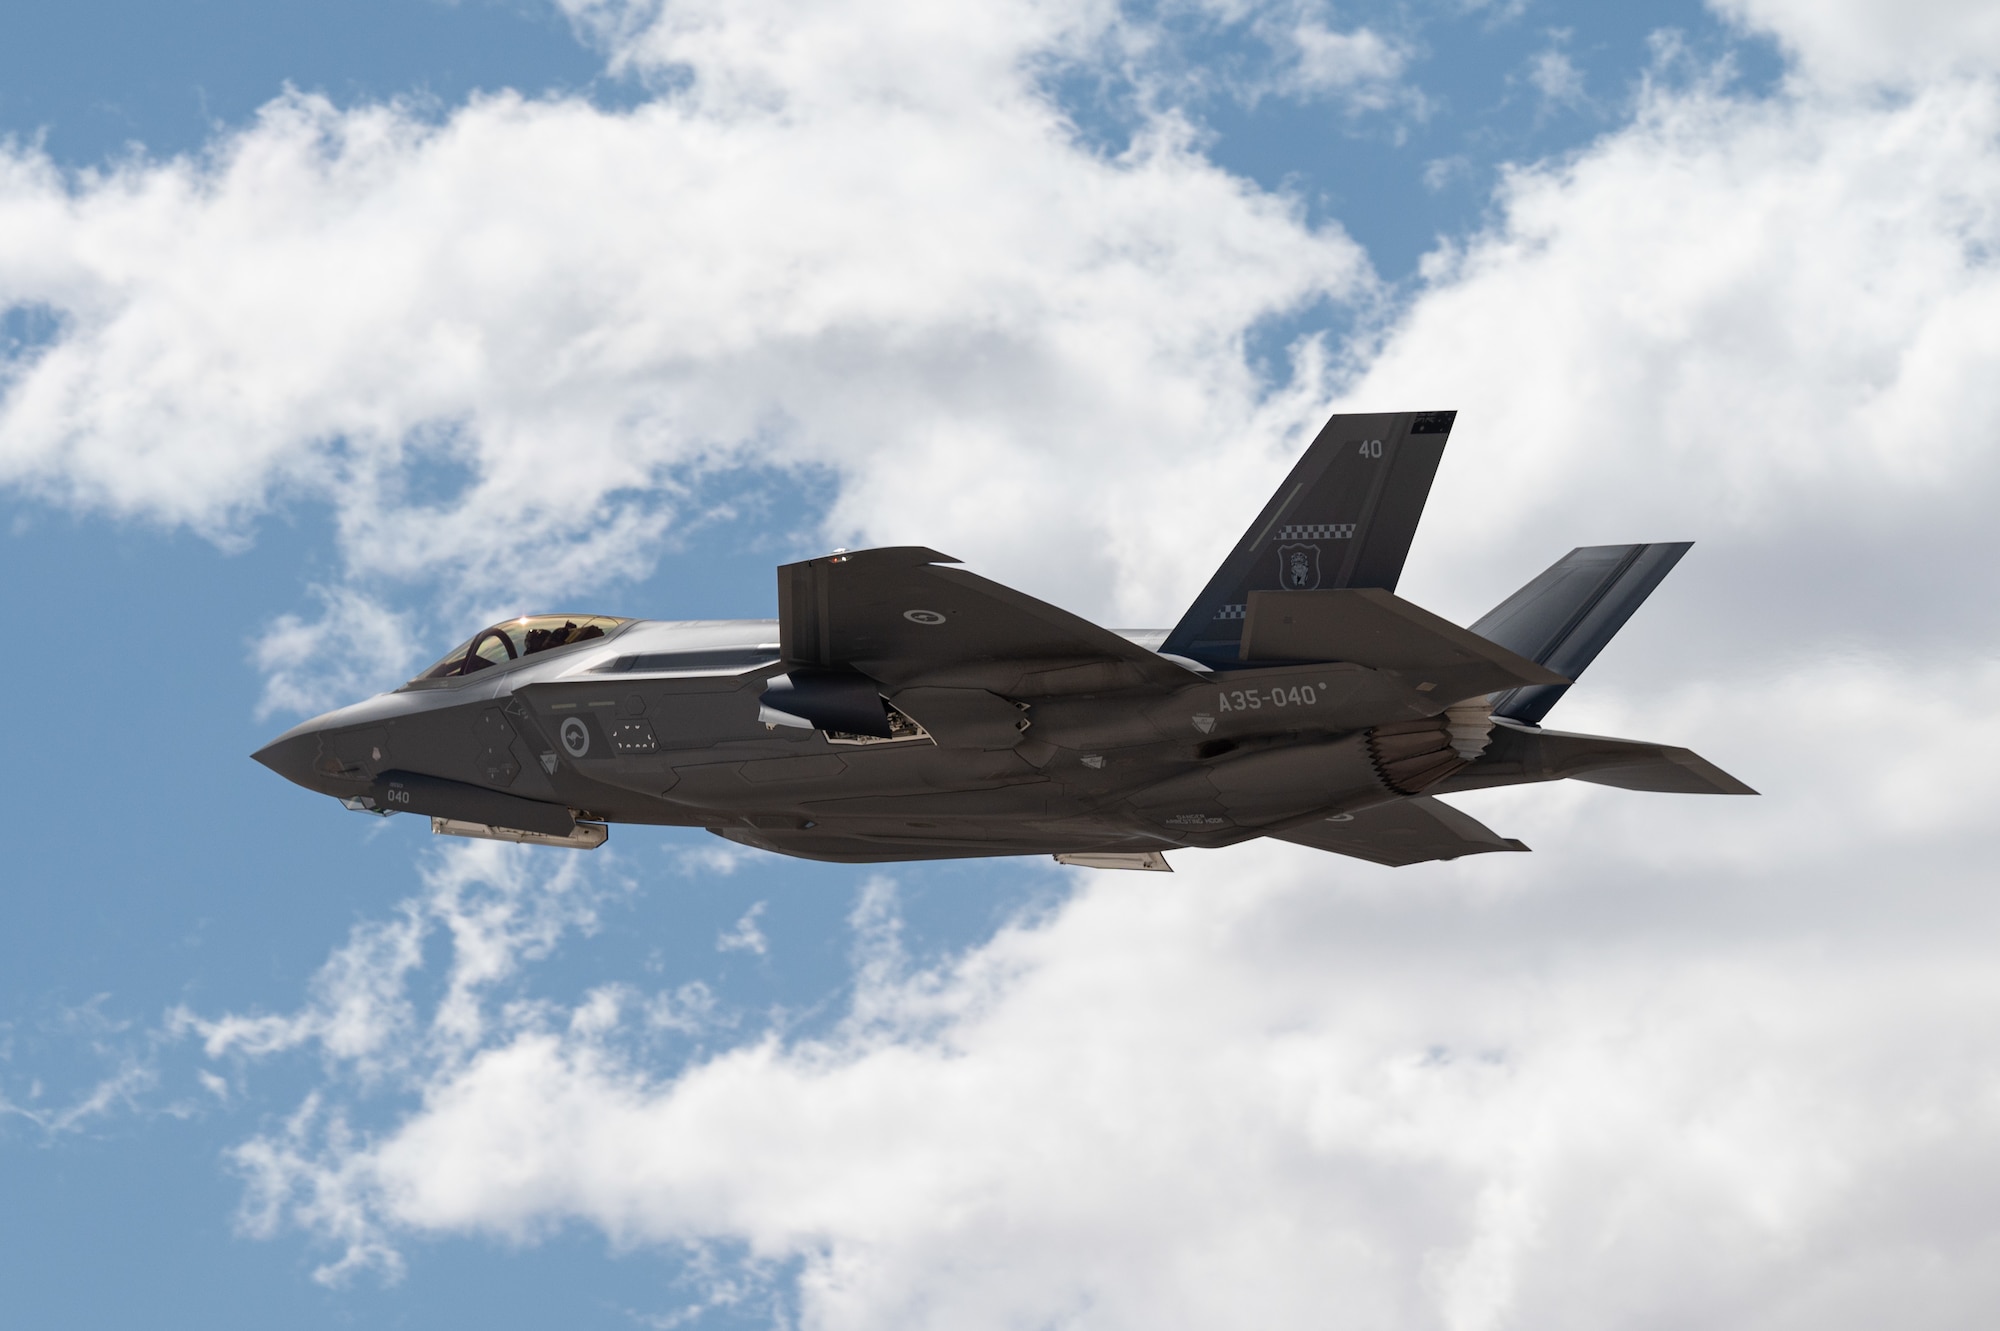 A Royal Australian Air Force F-35A Lightning II Takes off in participation of Black Flag 22-1, Nellis Air Force Base, Nevada, May 11, 2022. One of the objectives of Black Flag 22-1 is to investigate long-range kill chain options from sensor to shooter to ensure interoperability and integrated effects for mission success. (U.S. Air Force photo by Airman Trevor Bell)